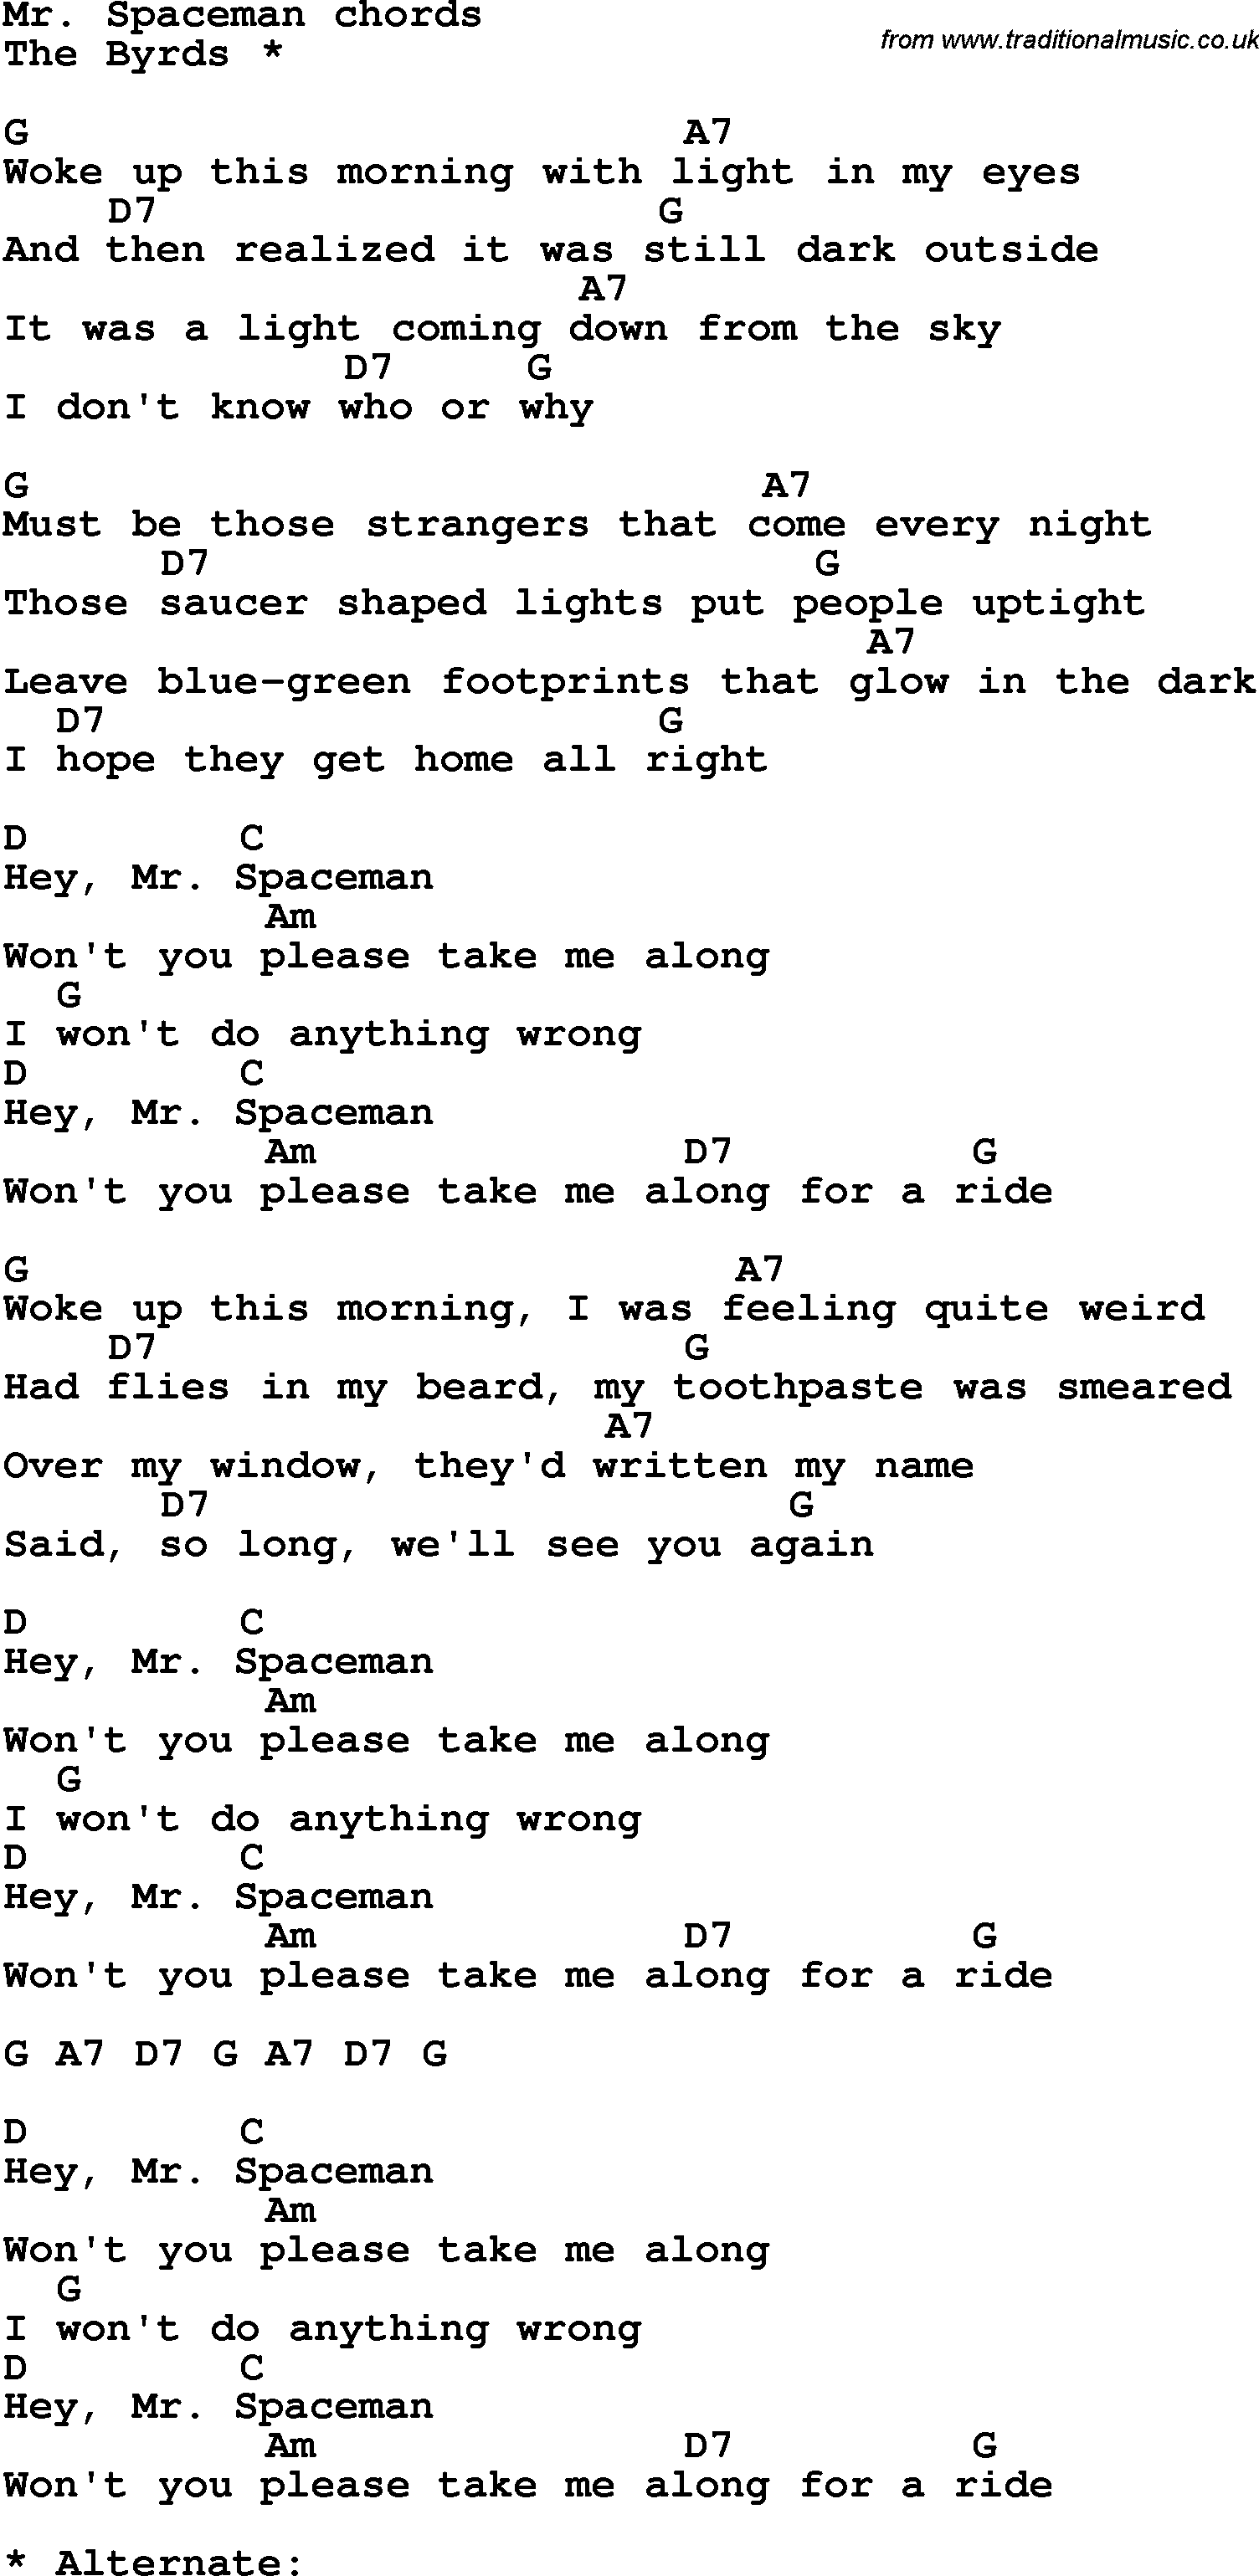 Song Lyrics with guitar chords for Mr Spaceman